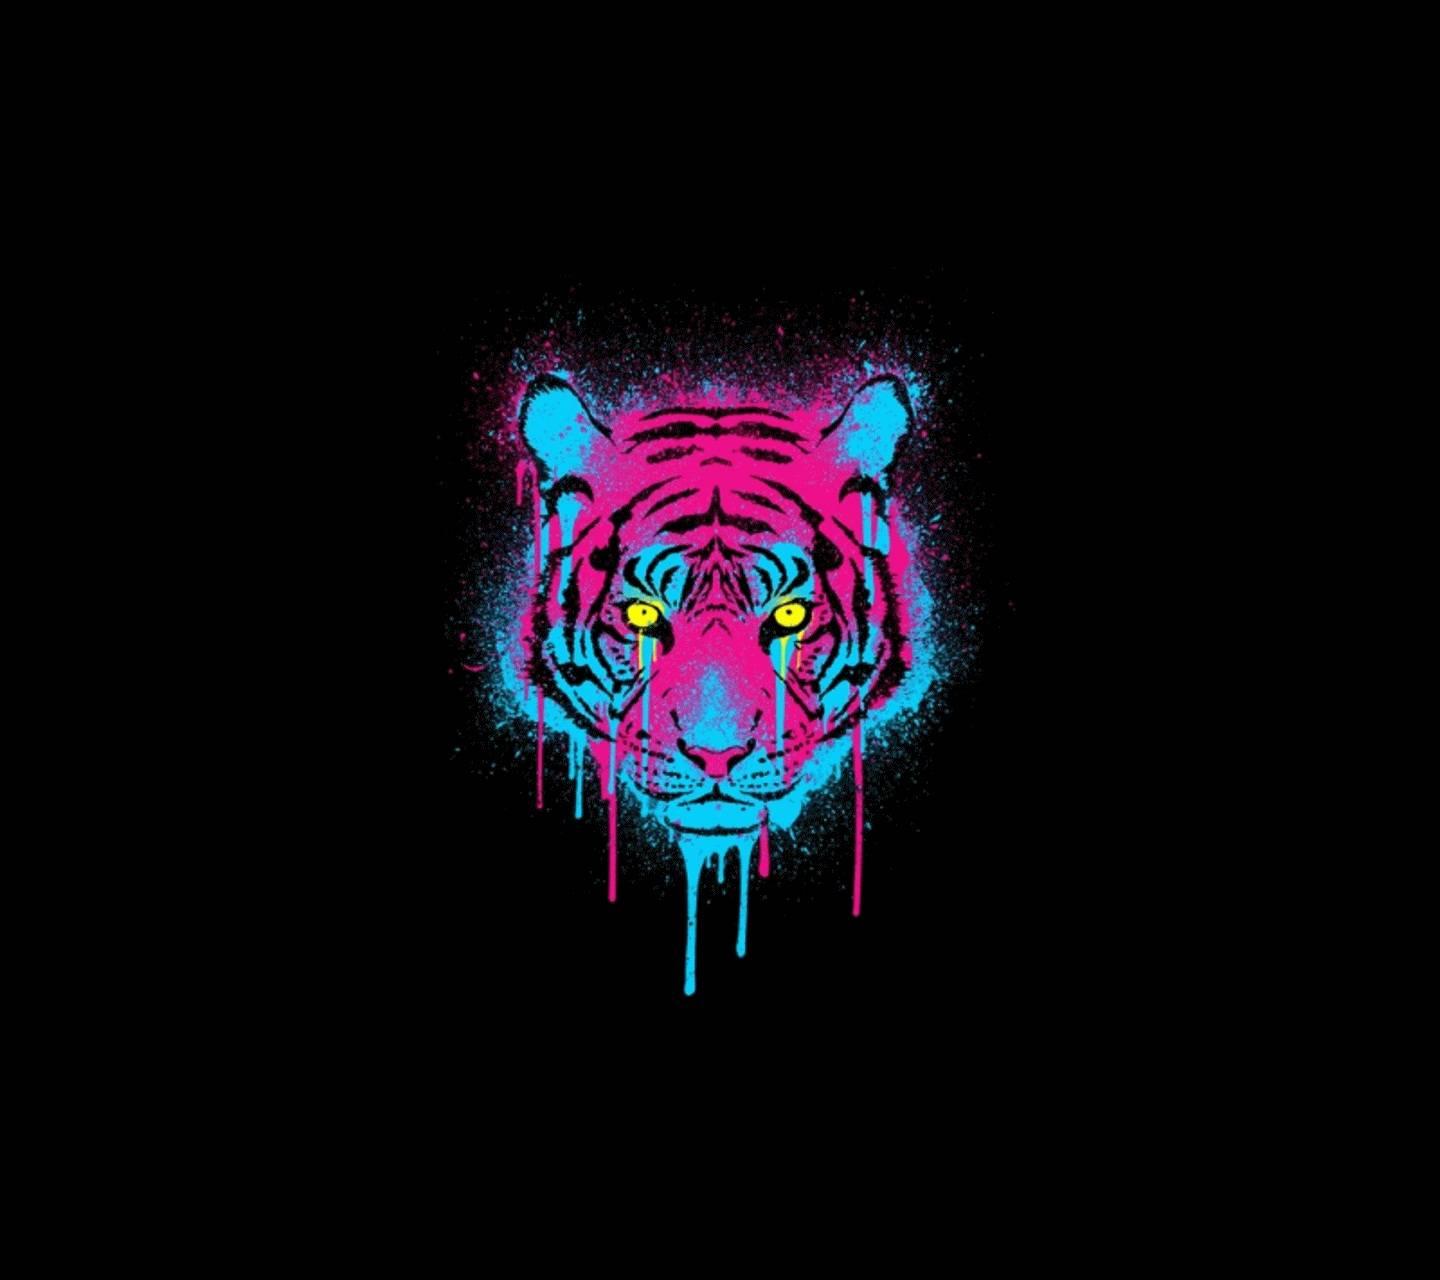 Neon Tiger Wallpapers Top Free Neon Tiger Backgrounds Wallpaperaccess